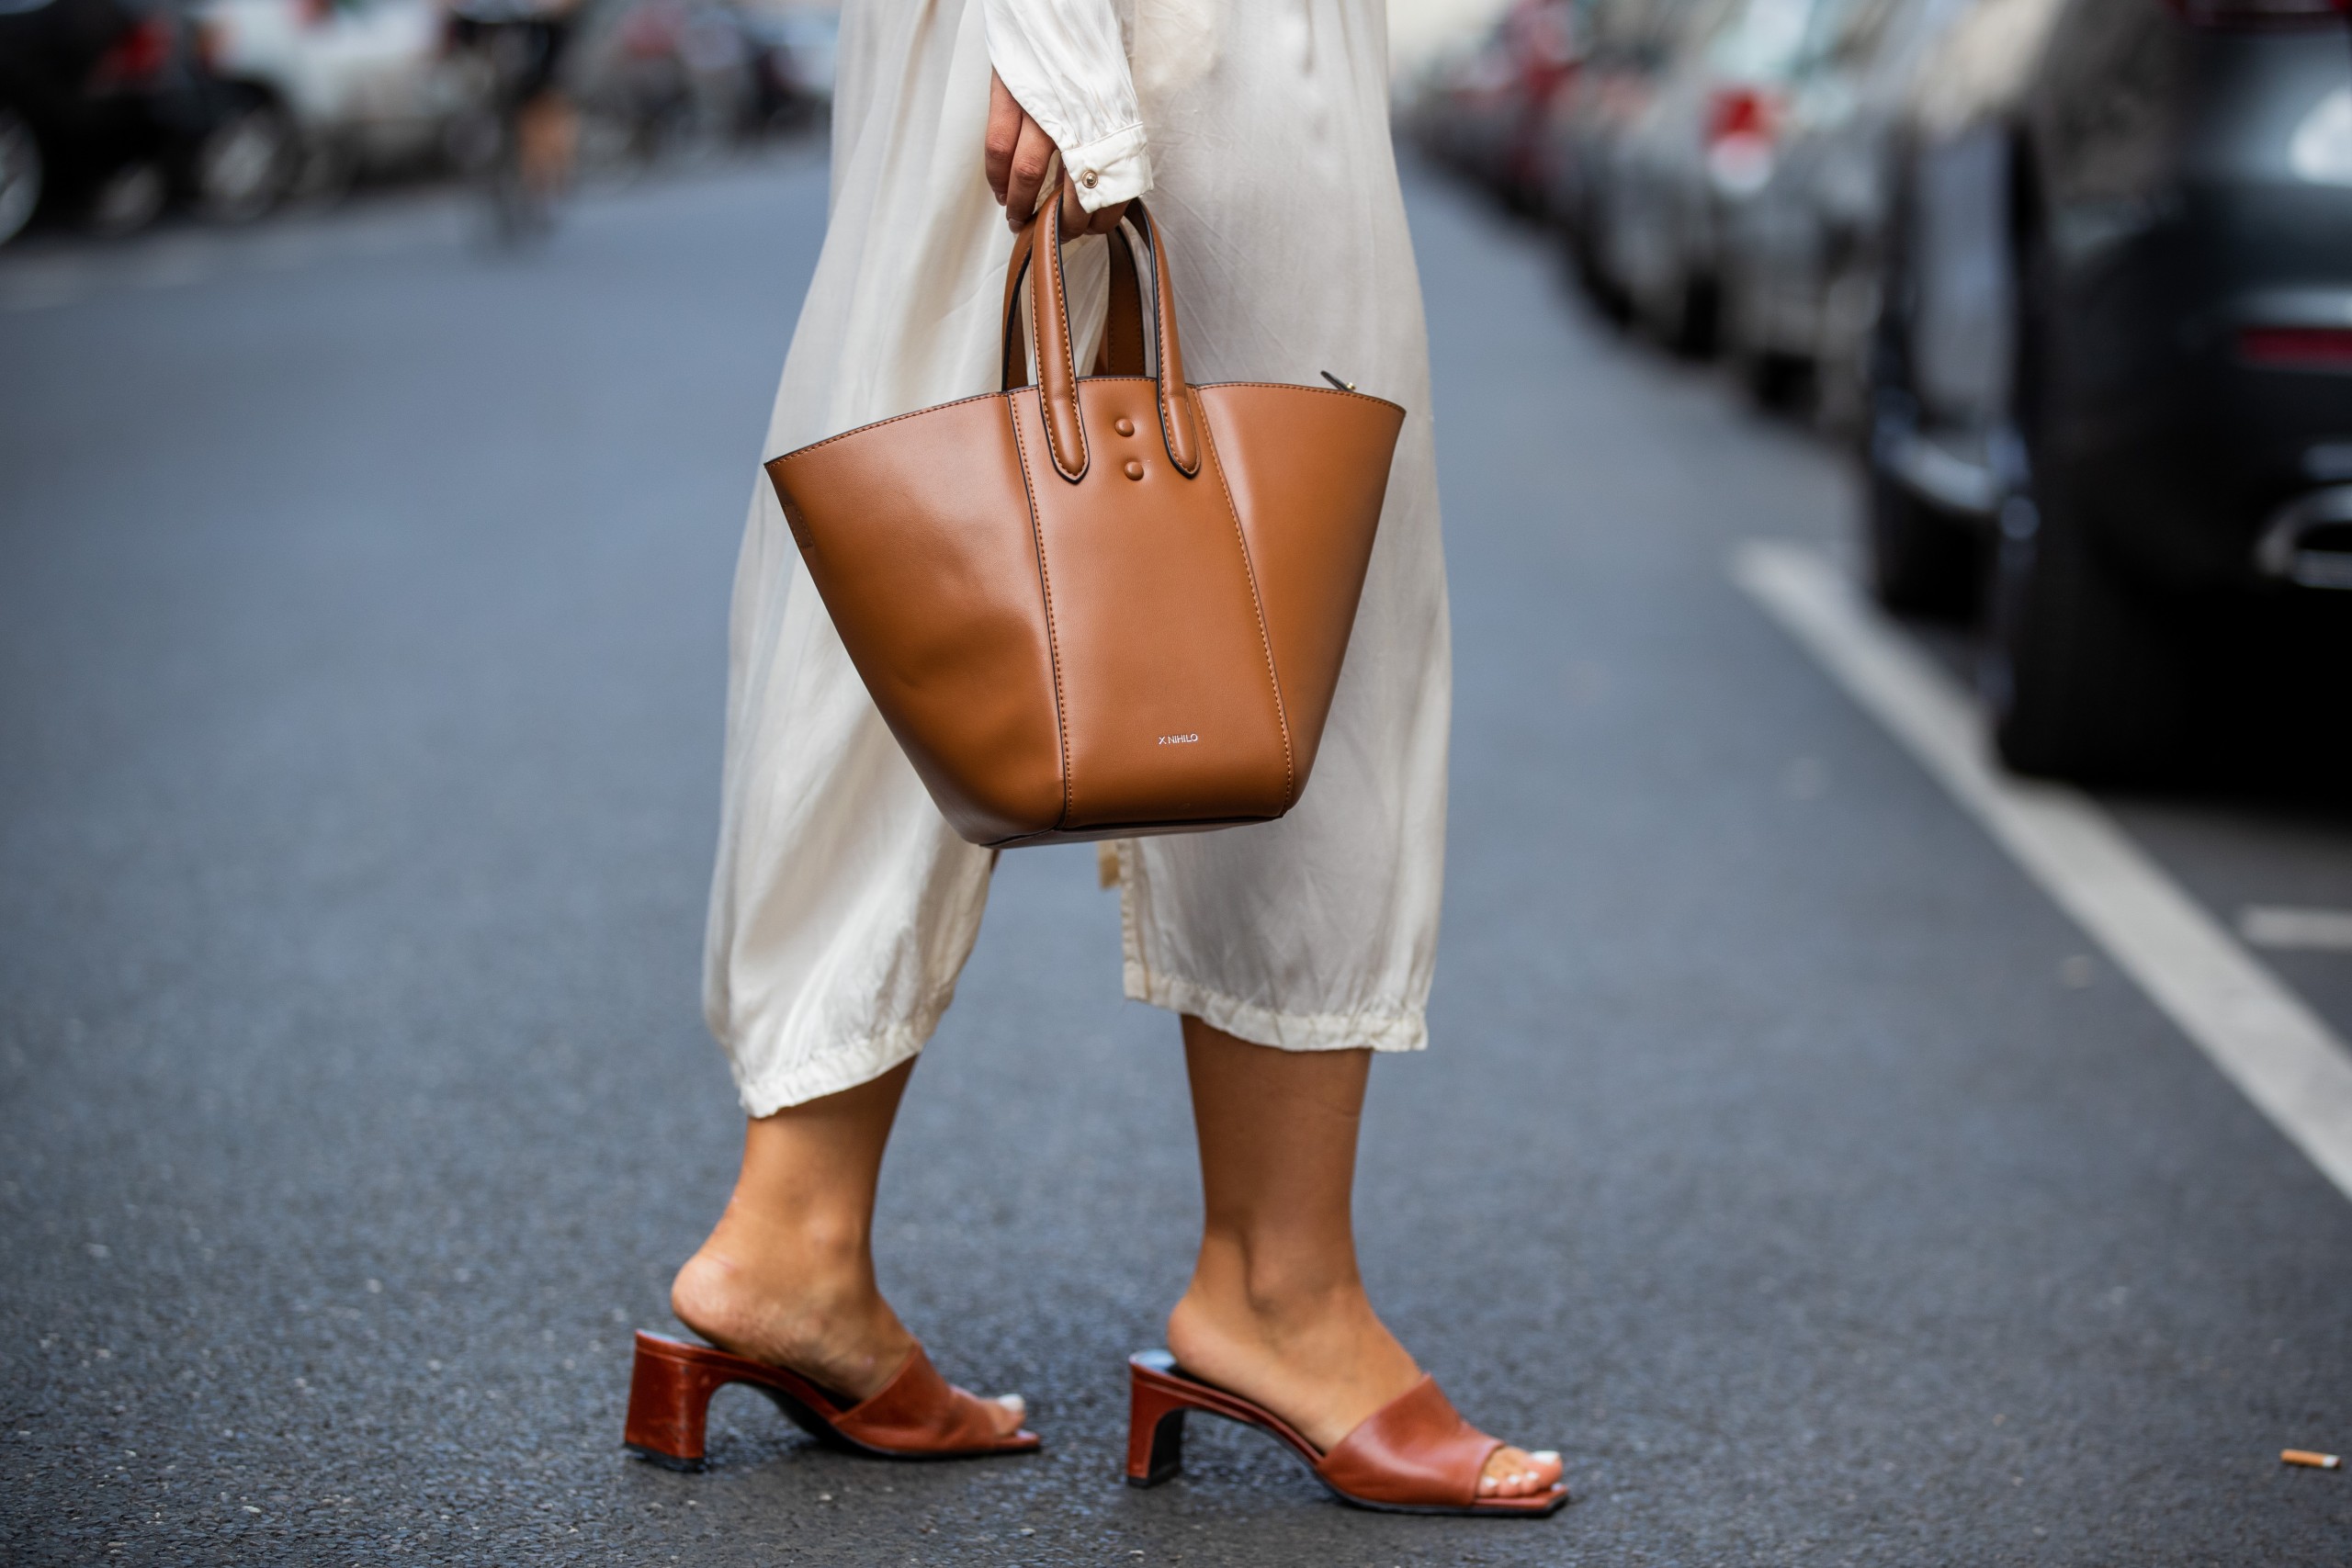 Handbags that every elegant woman should have in her closet